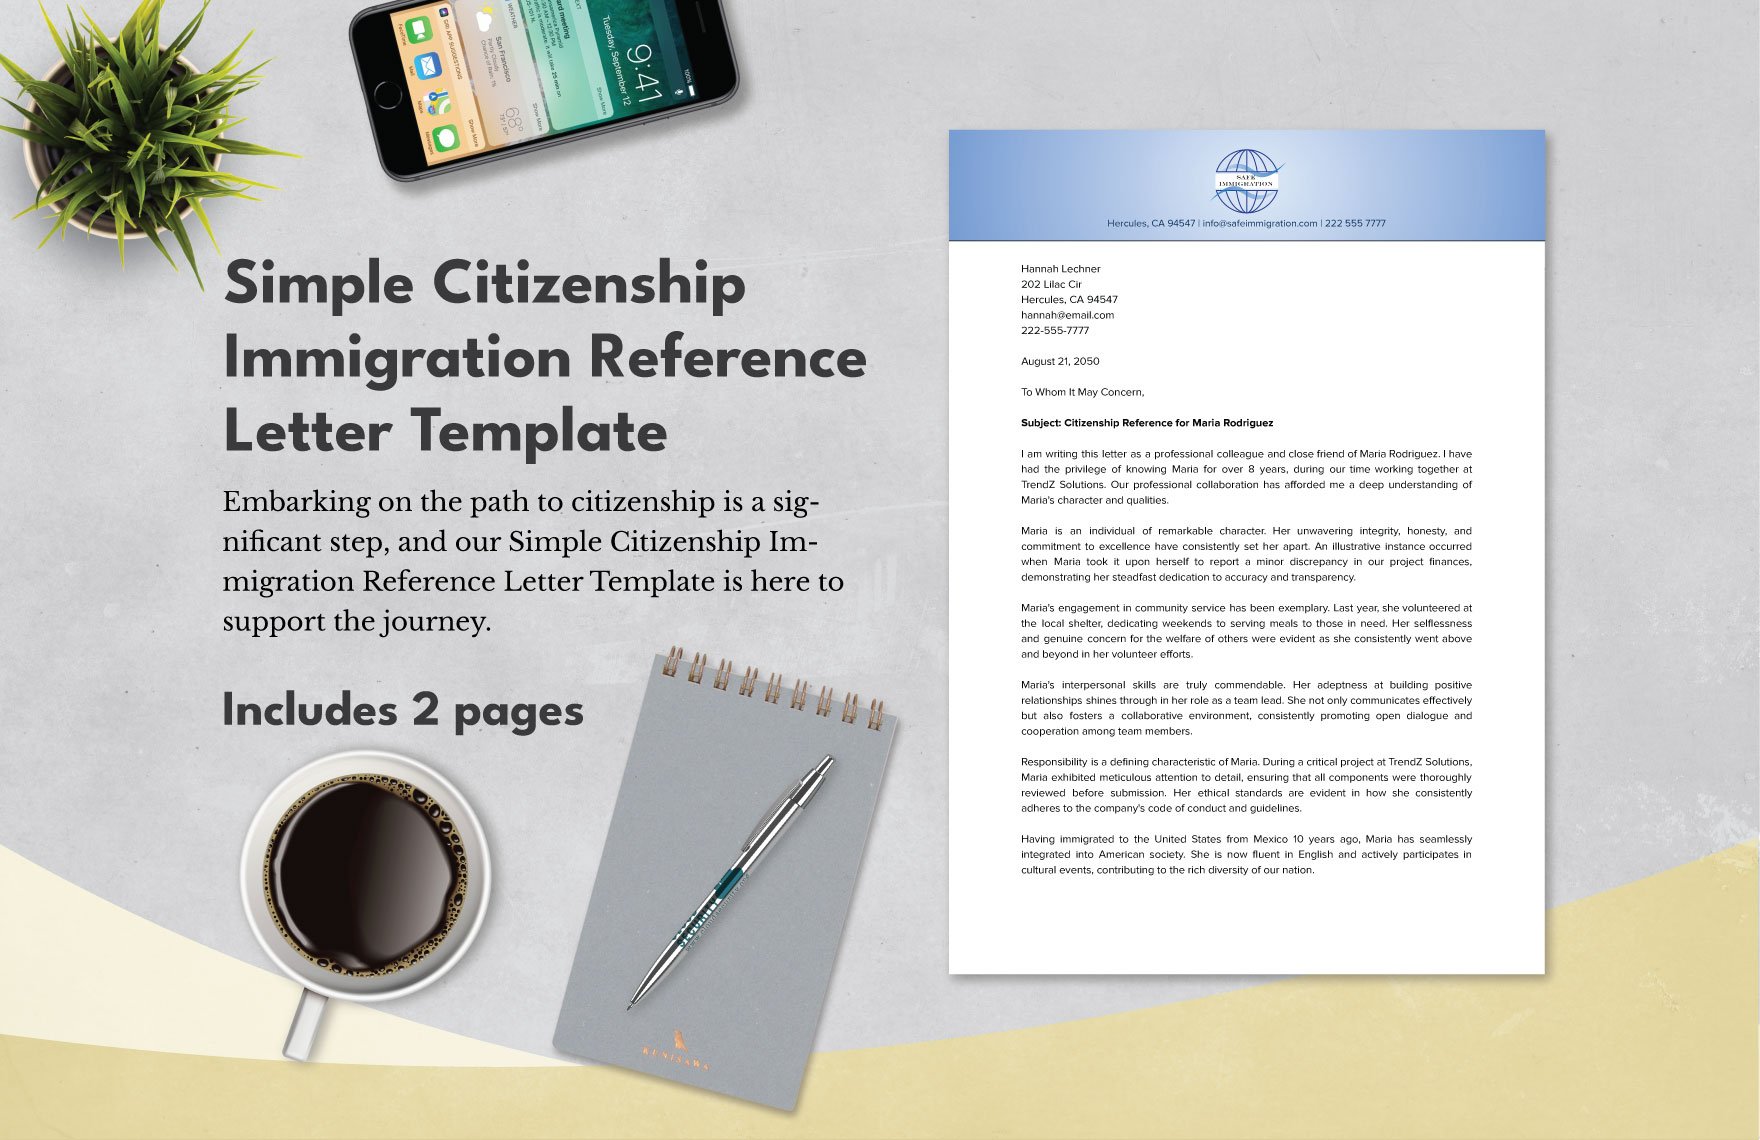 Simple Citizenship Immigration Reference Letter Template